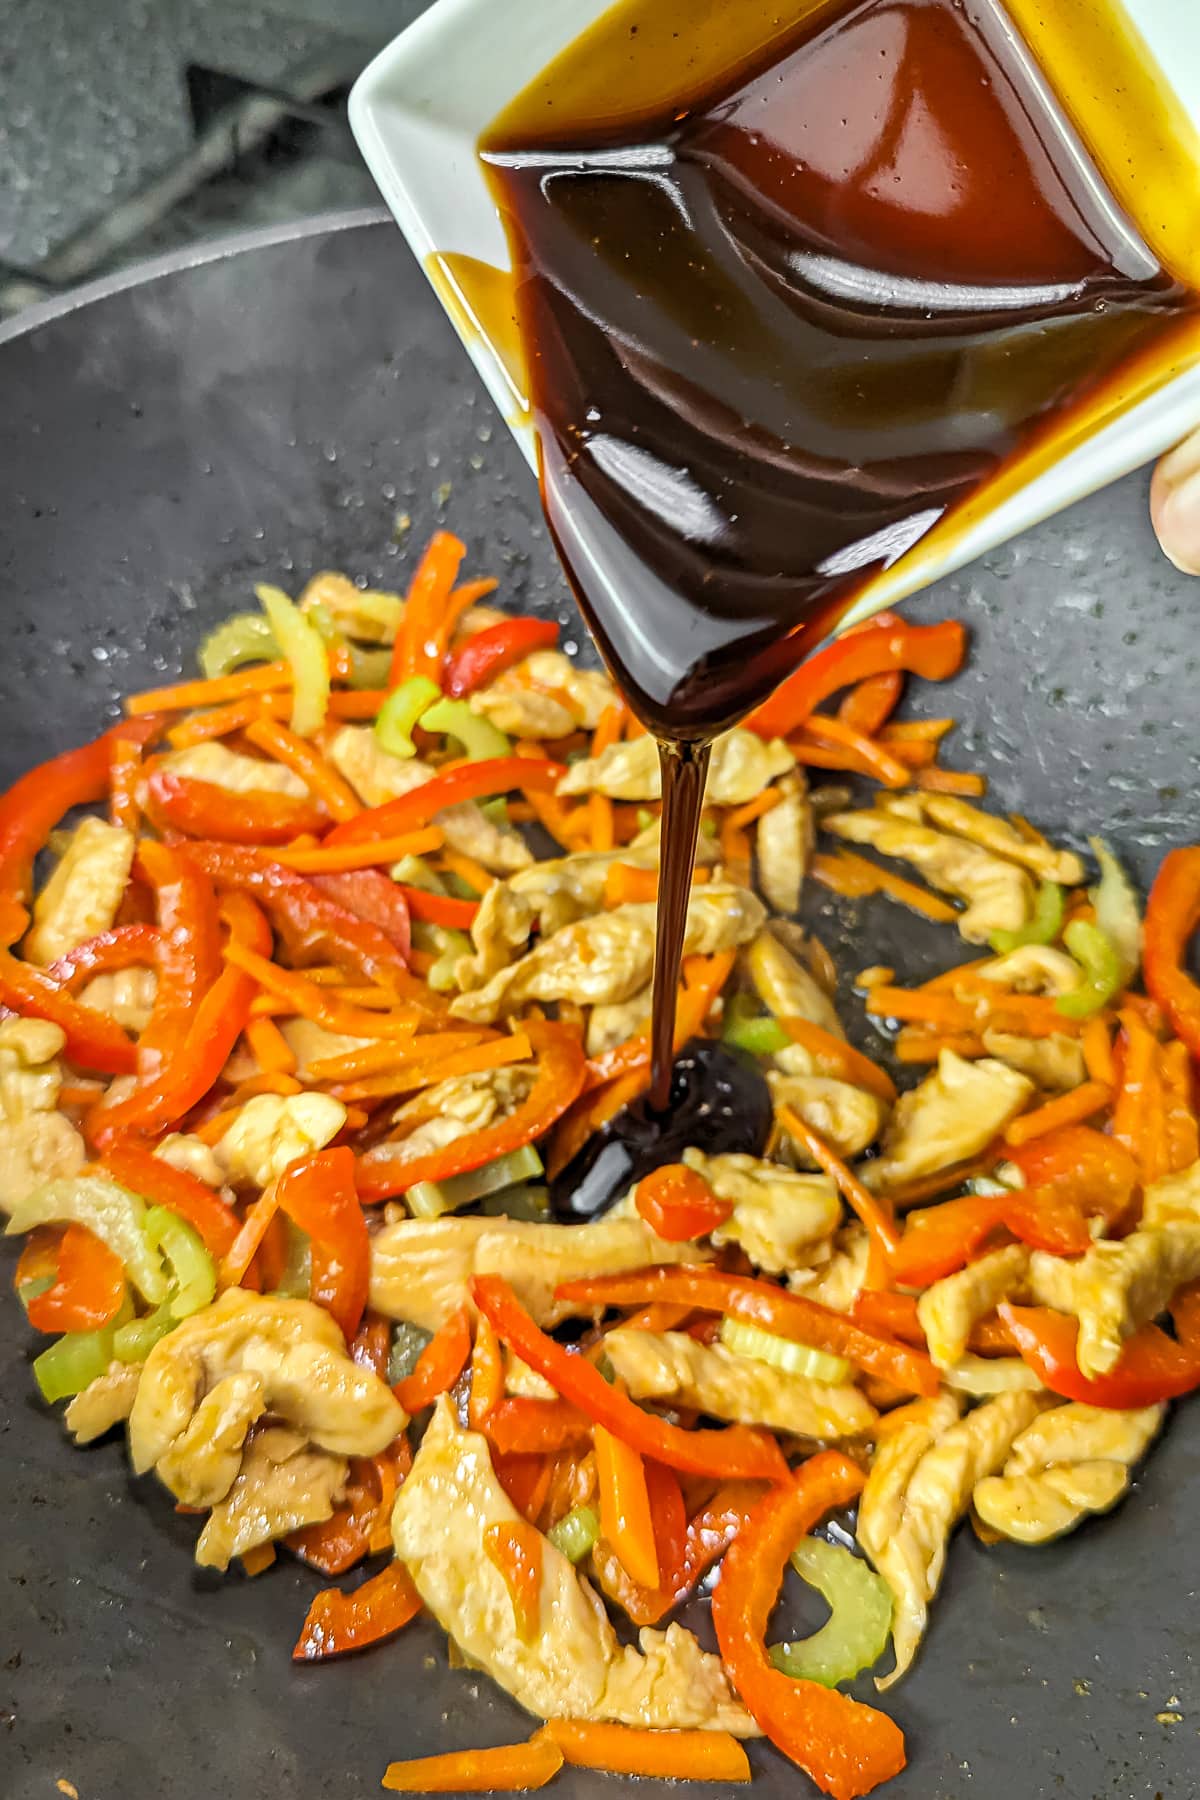 Teriyaki sauce being poured over the chicken and vegetable stir-fry in a pan.